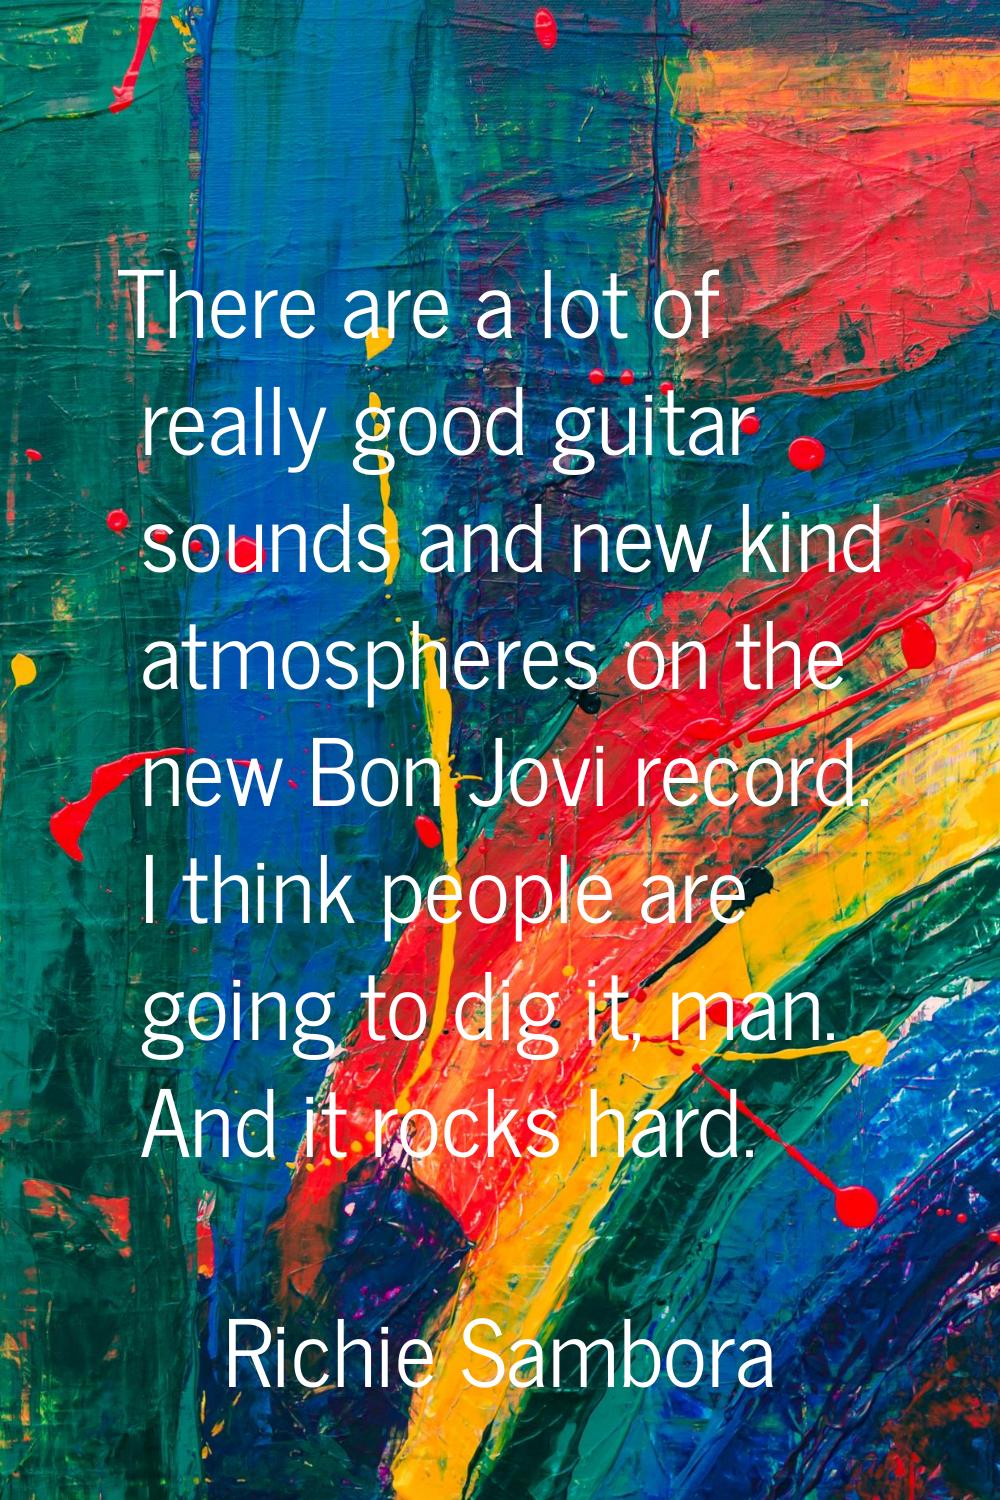 There are a lot of really good guitar sounds and new kind atmospheres on the new Bon Jovi record. I